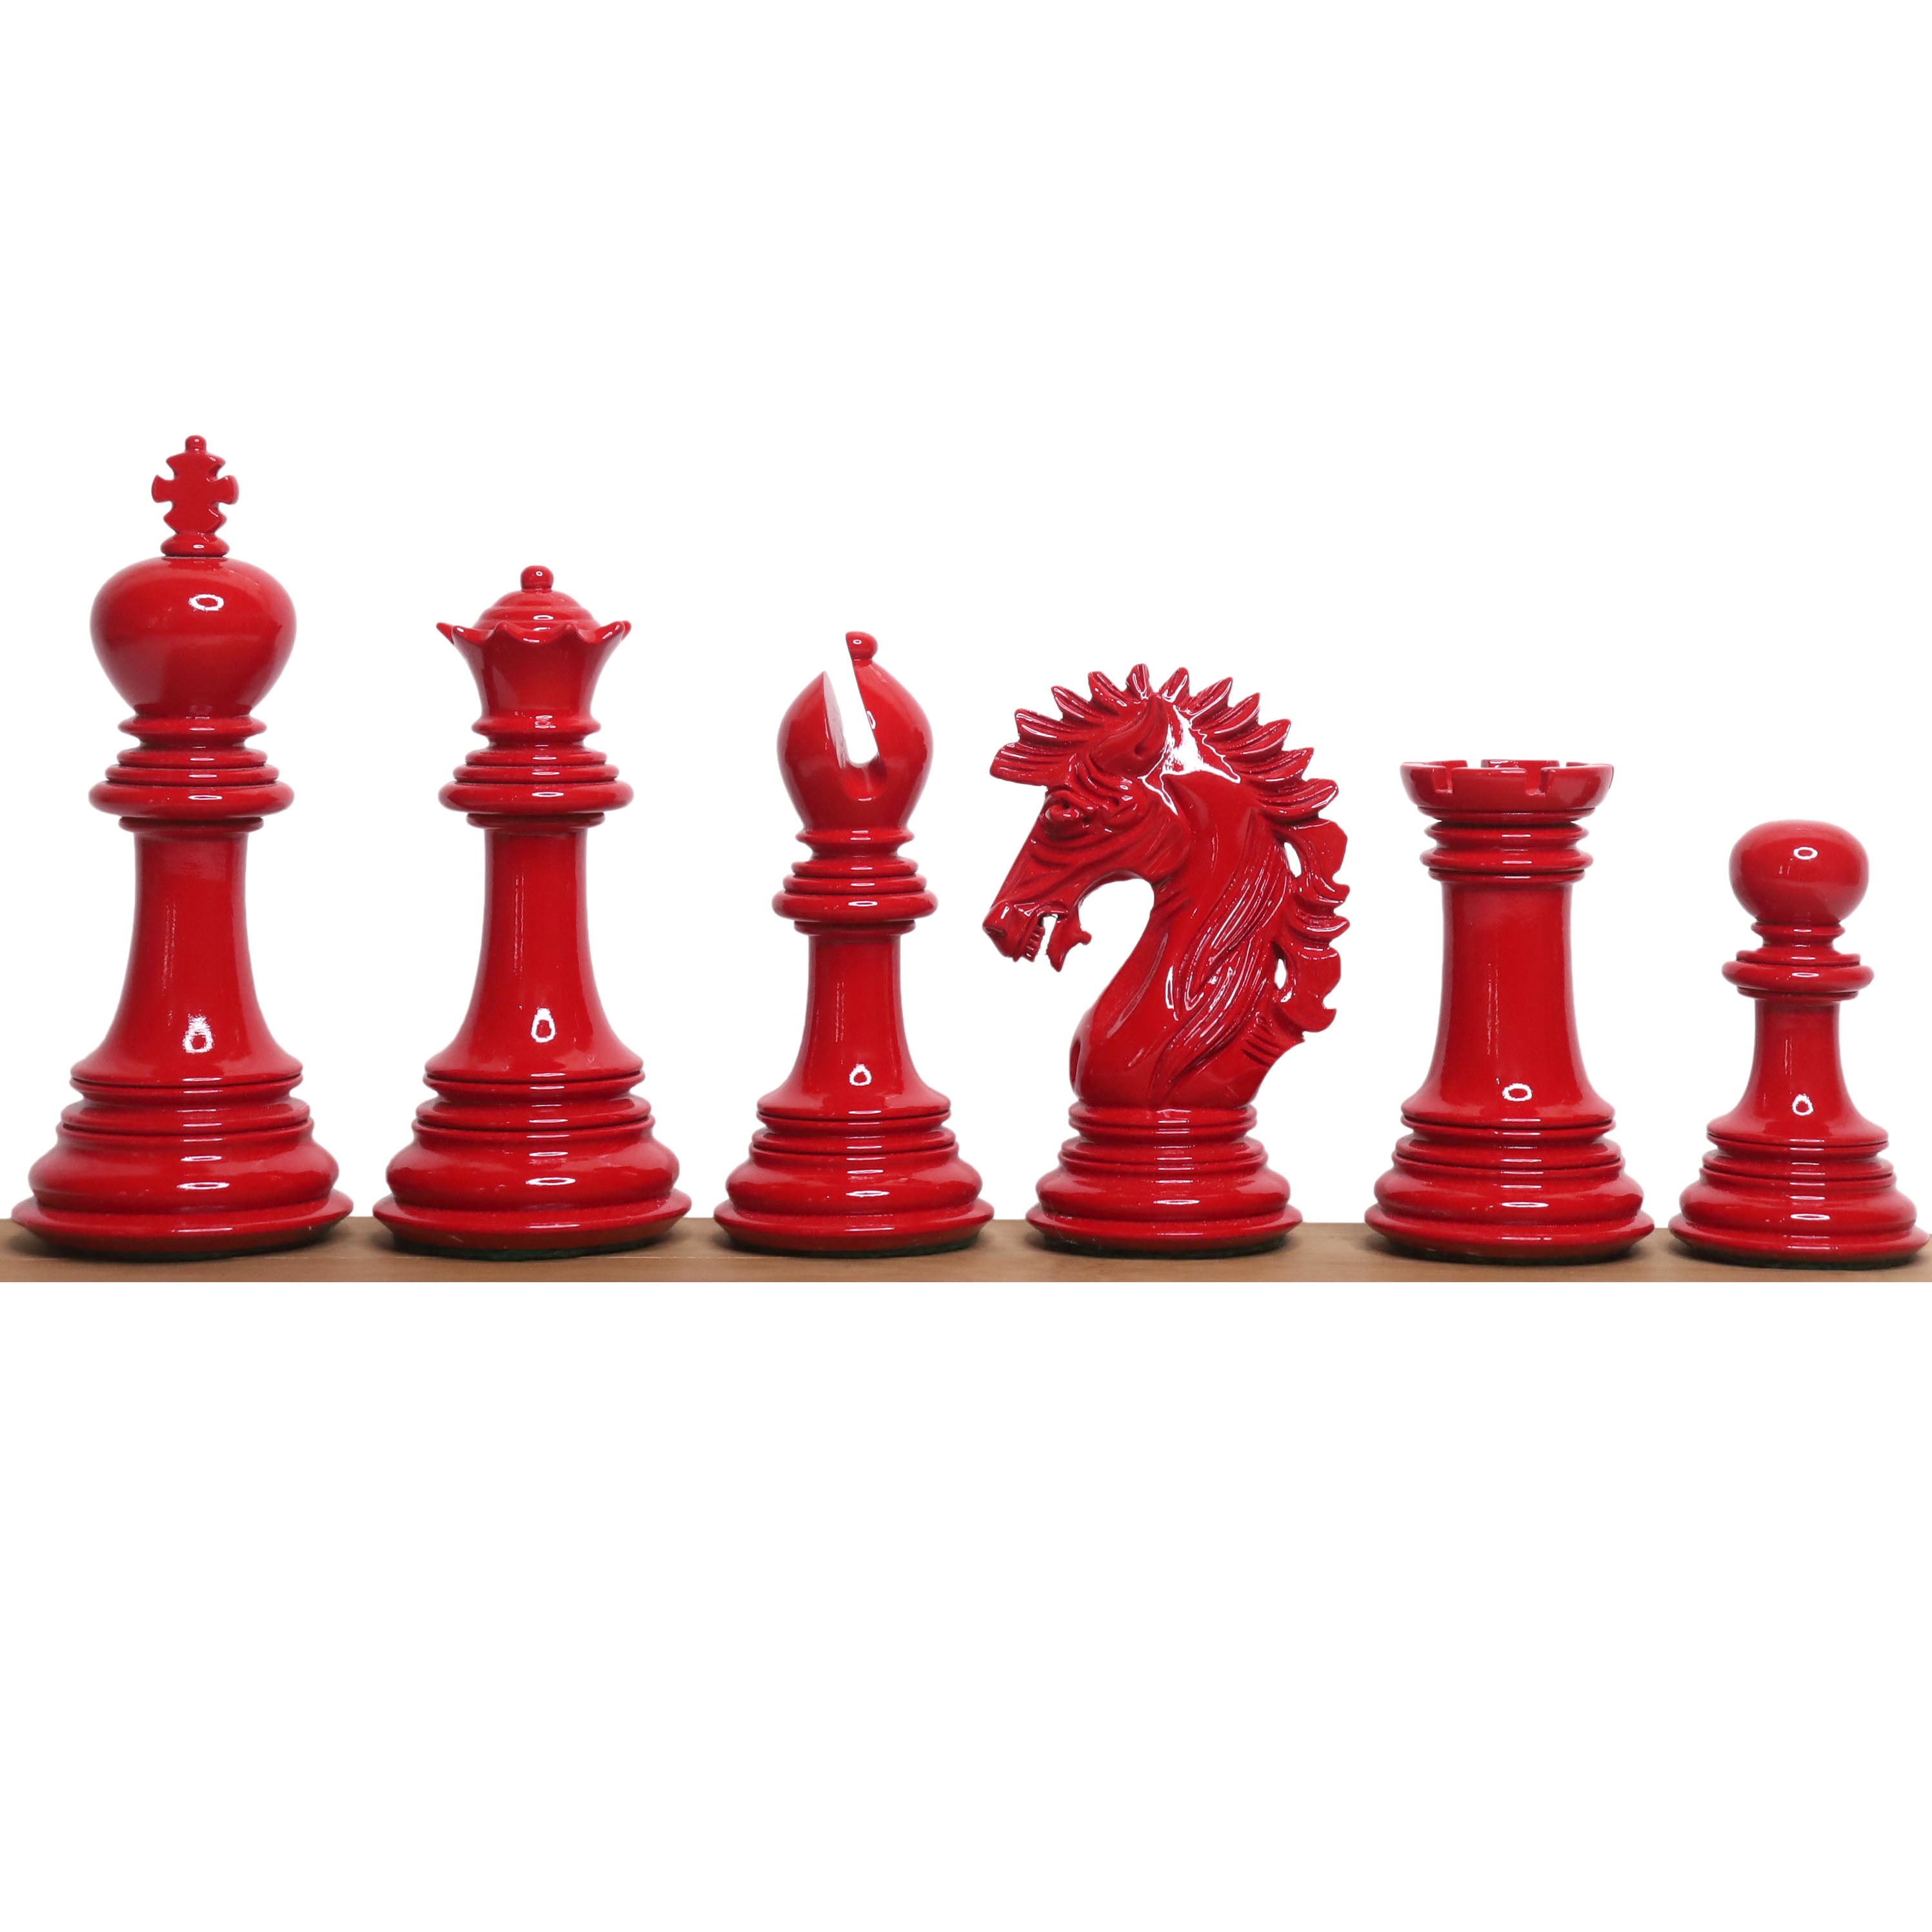 Slightly imperfect 4.6" Mogul Staunton Luxury Chess Pieces Only Set - White & Red Lacquered Boxwood